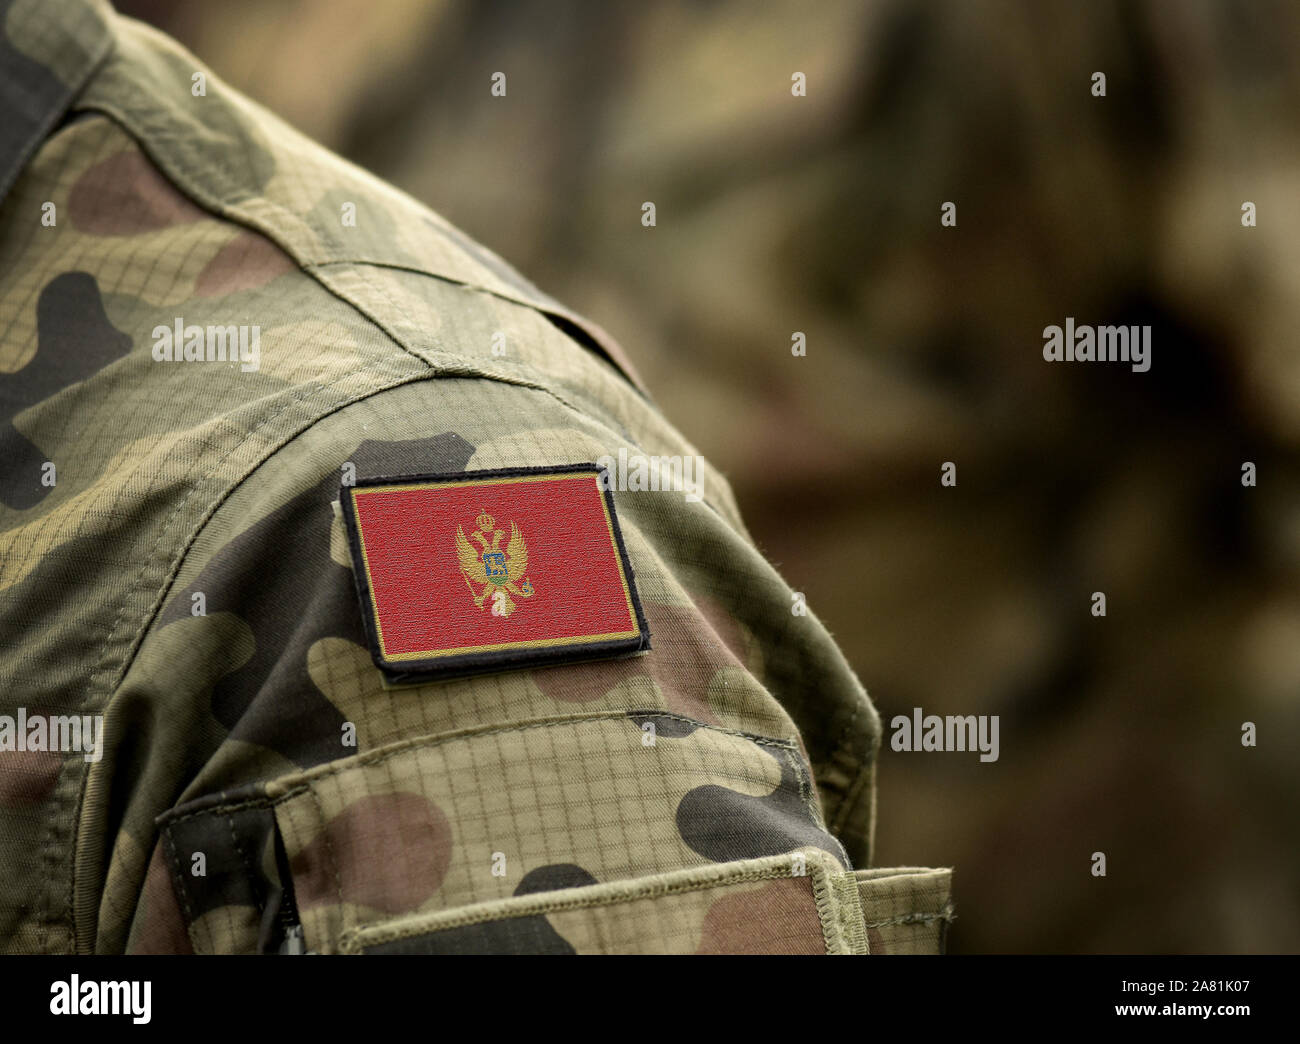 Flag of Montenegro on military uniform. Army, troops, soldiers. Collage. Stock Photo